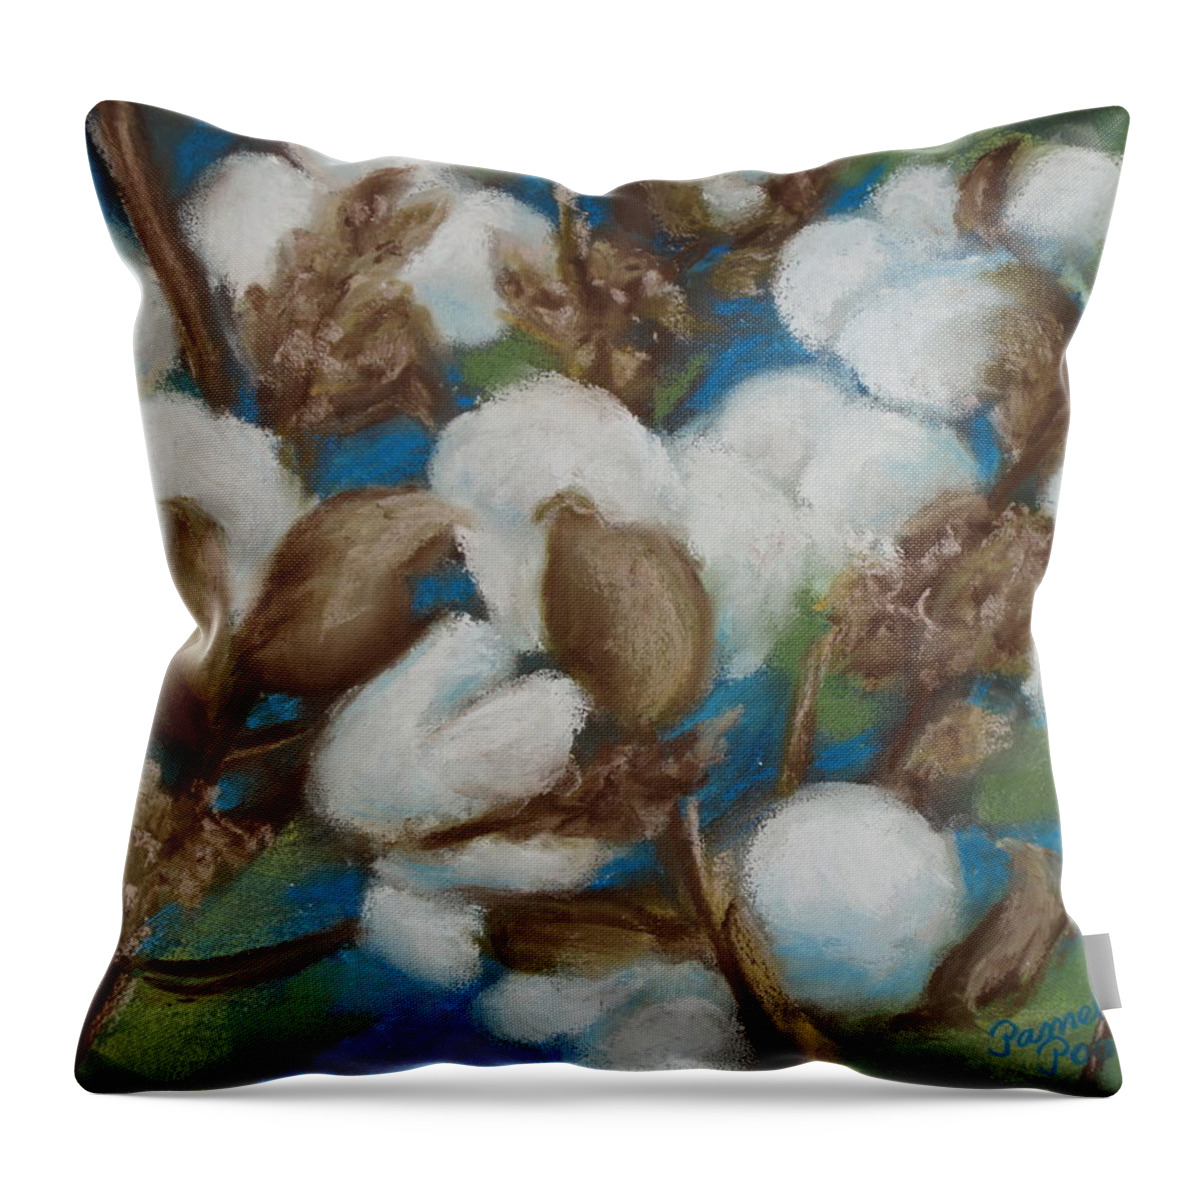 Cotton Throw Pillow featuring the painting Heritage Corridor Cotton by Pamela Poole